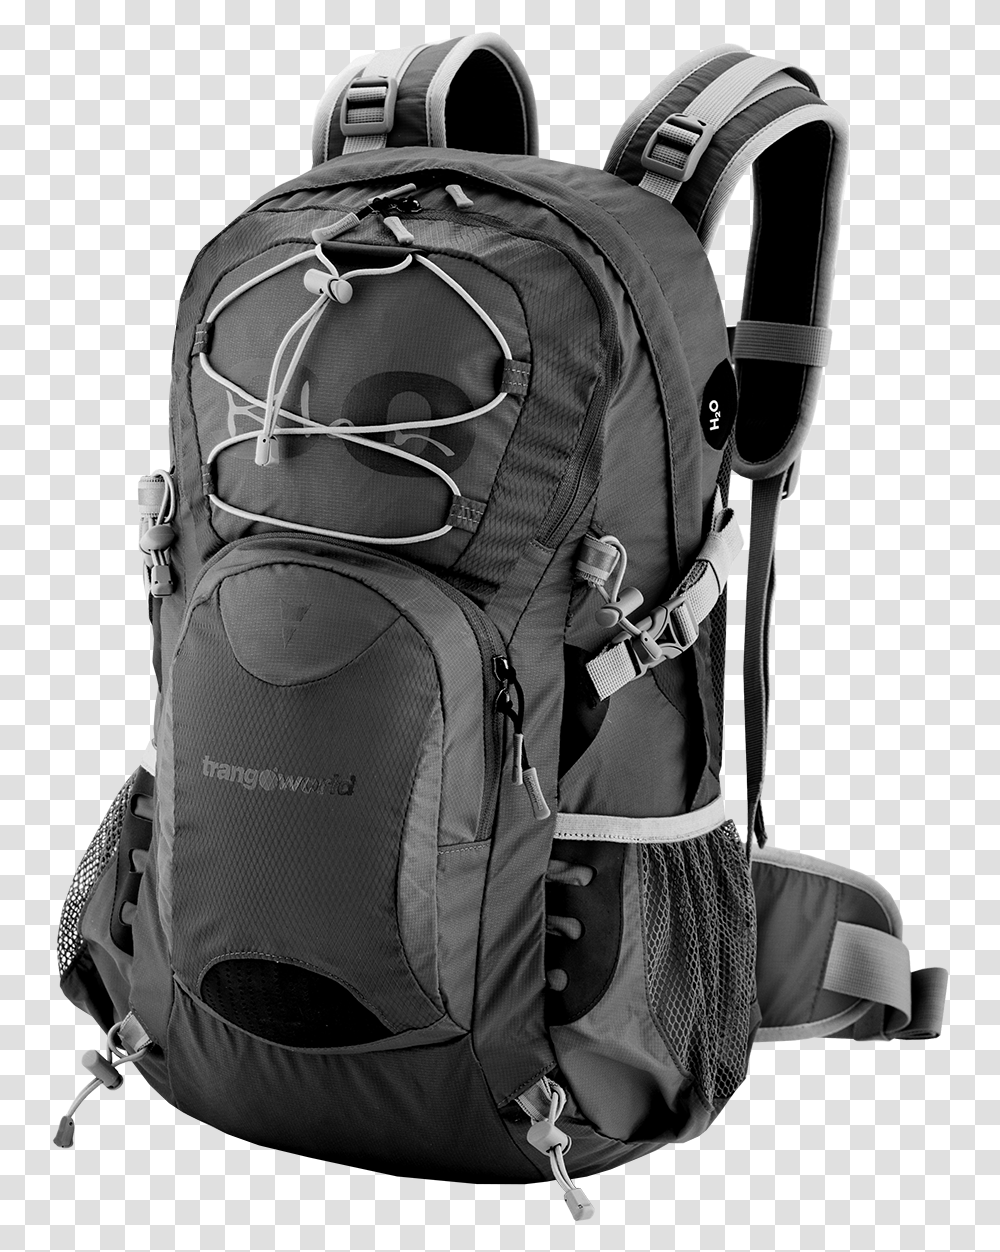 Download This High Resolution Backpack In High Trangoworld Klan, Bag Transparent Png